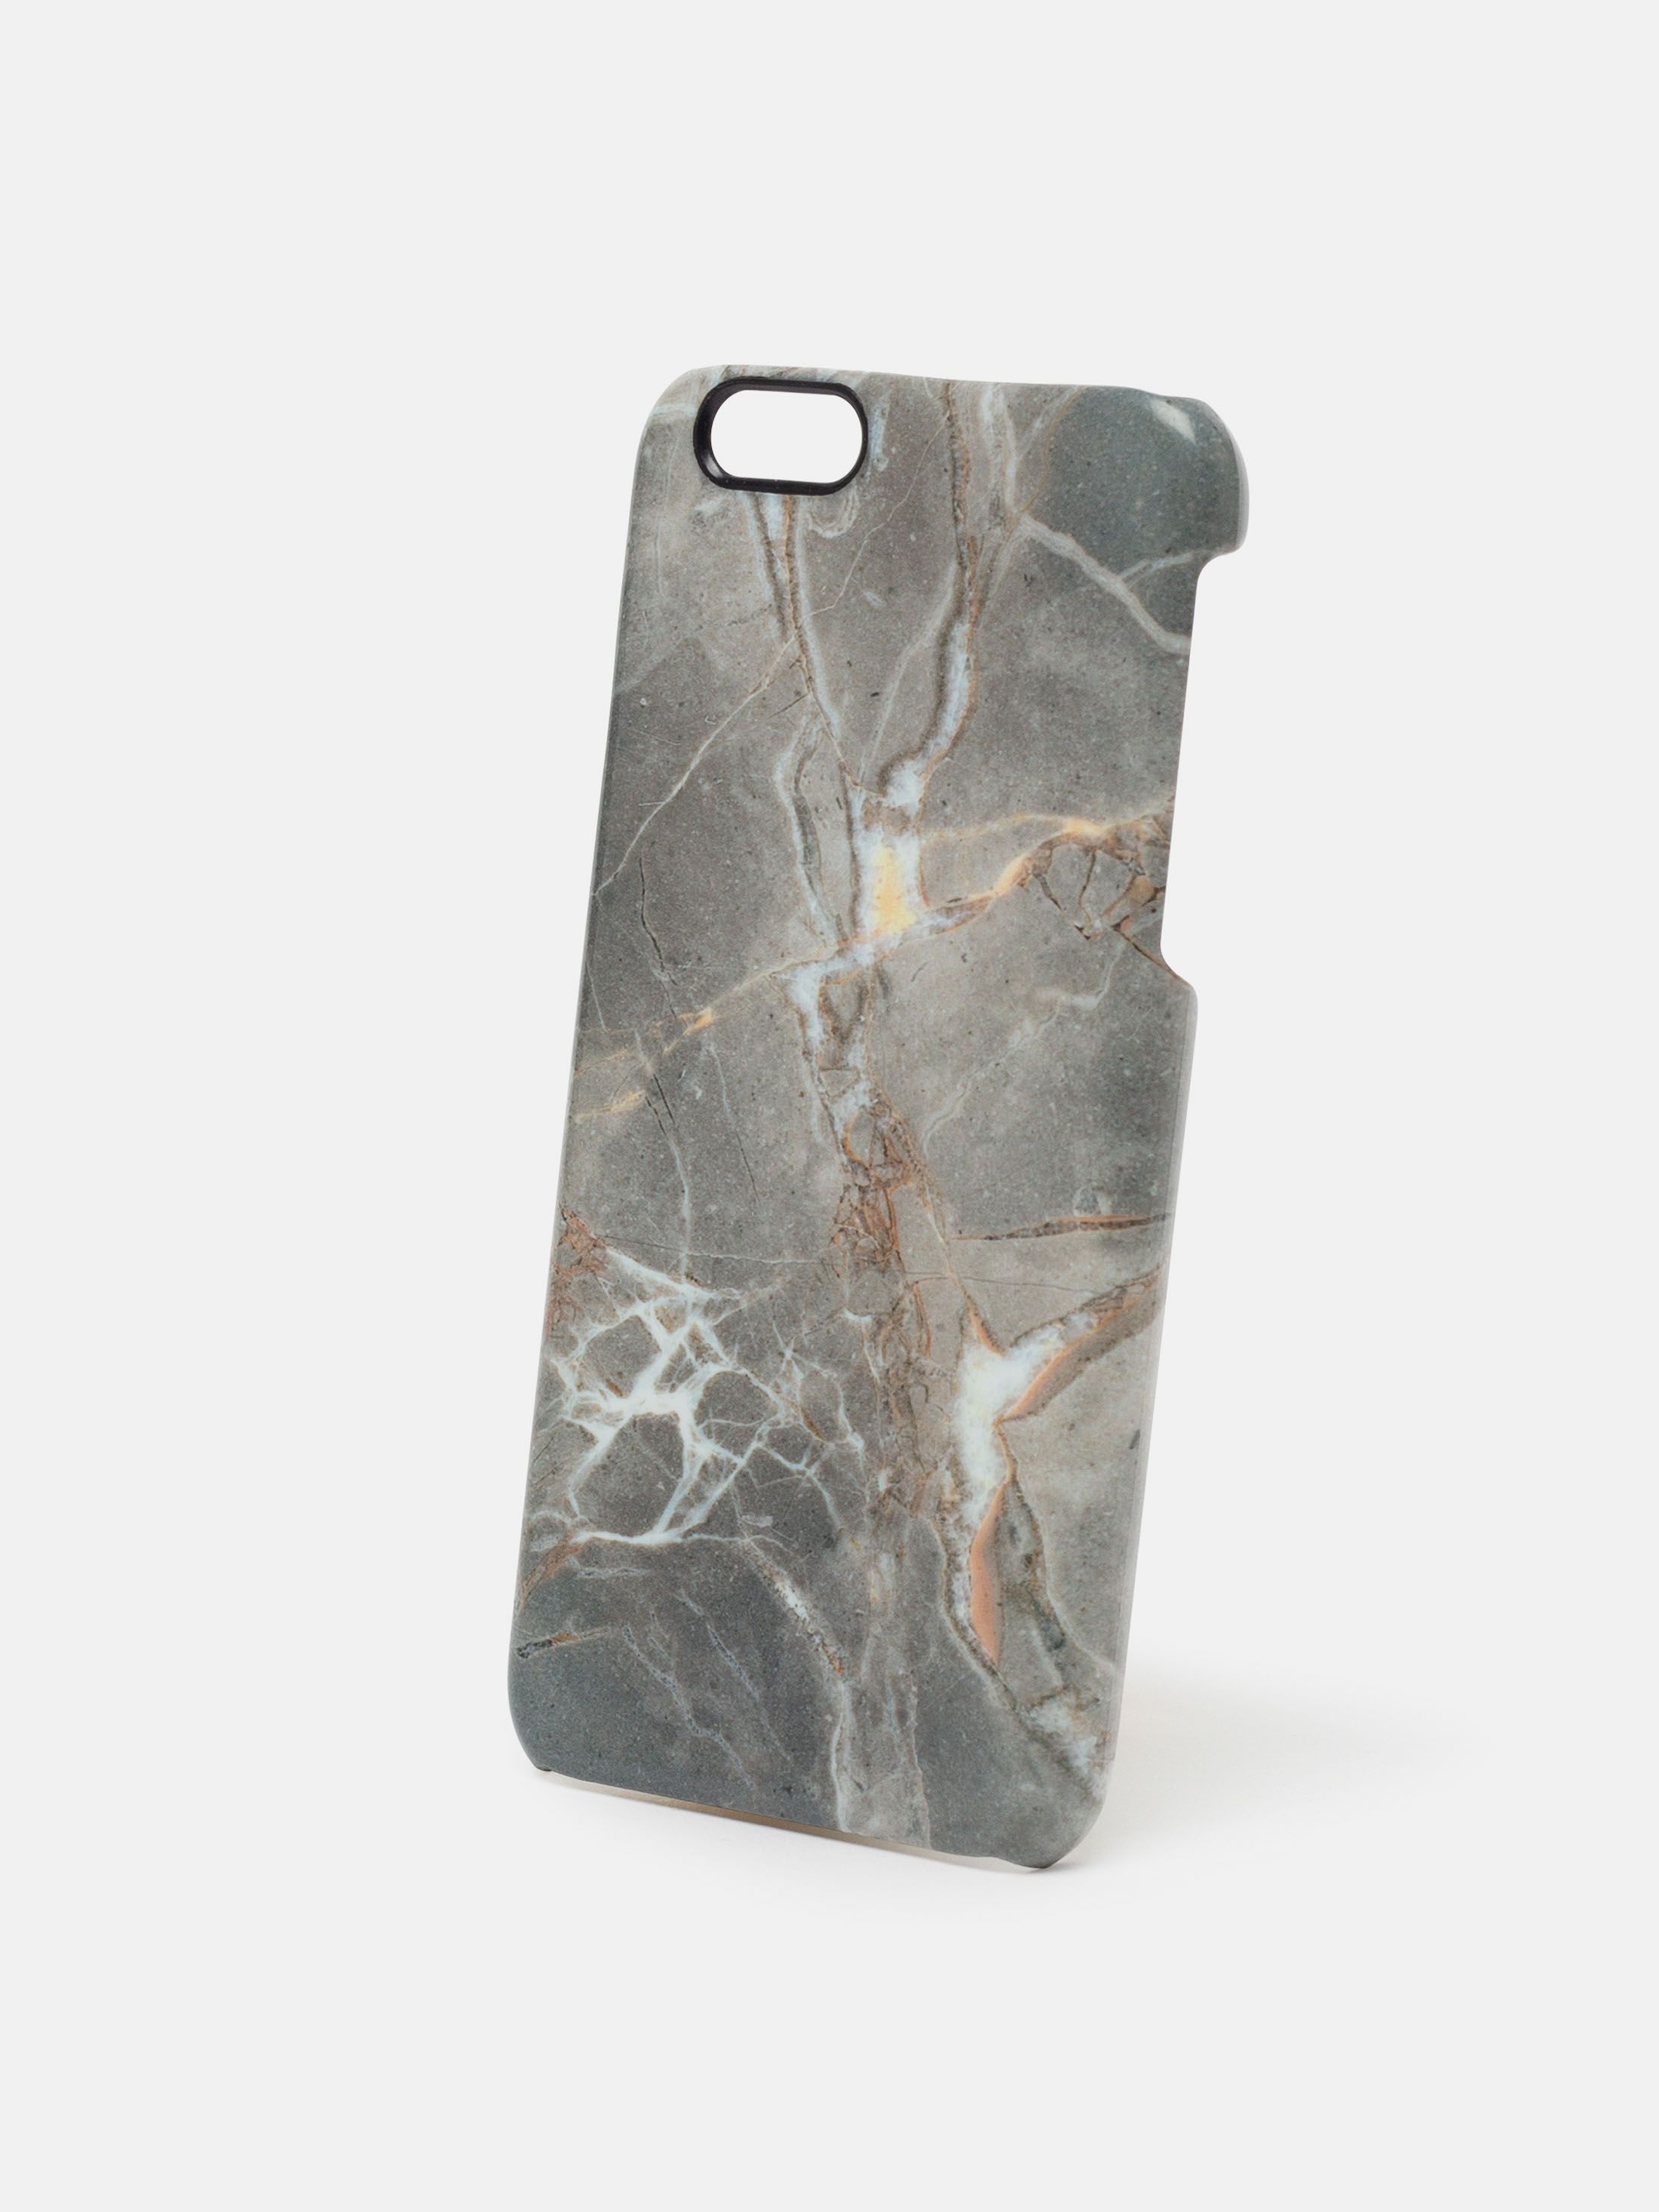 Create Your iPhone Case | iPhone 6/6+